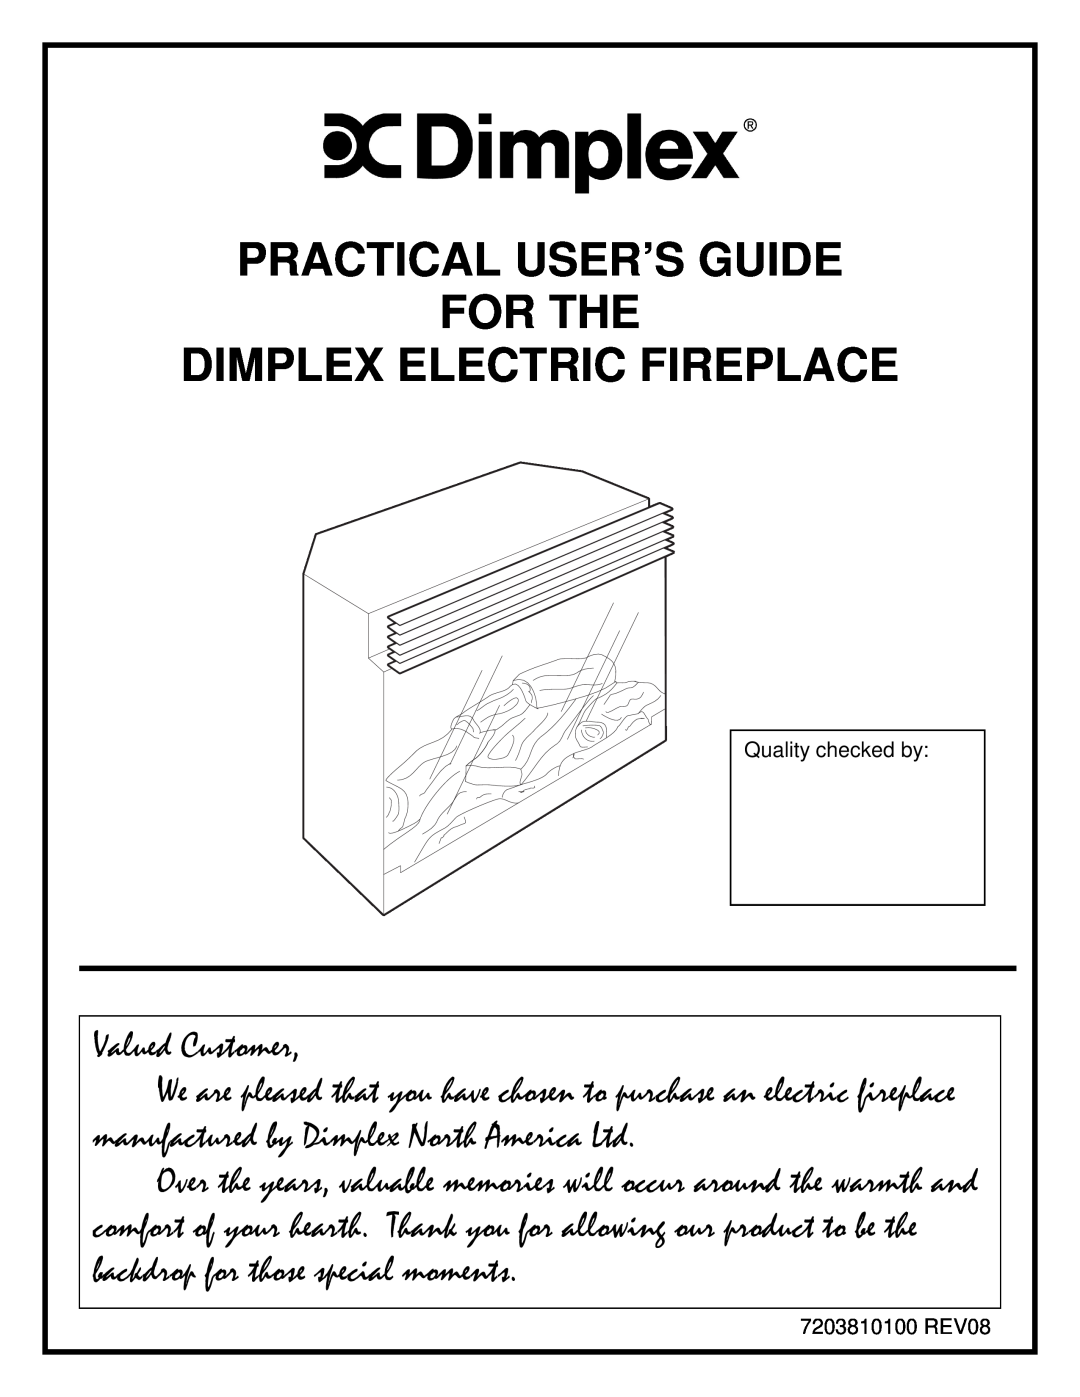 Dimplex DF2603 manual Practical User’S Guide For The, Dimplex Electric Fireplace 